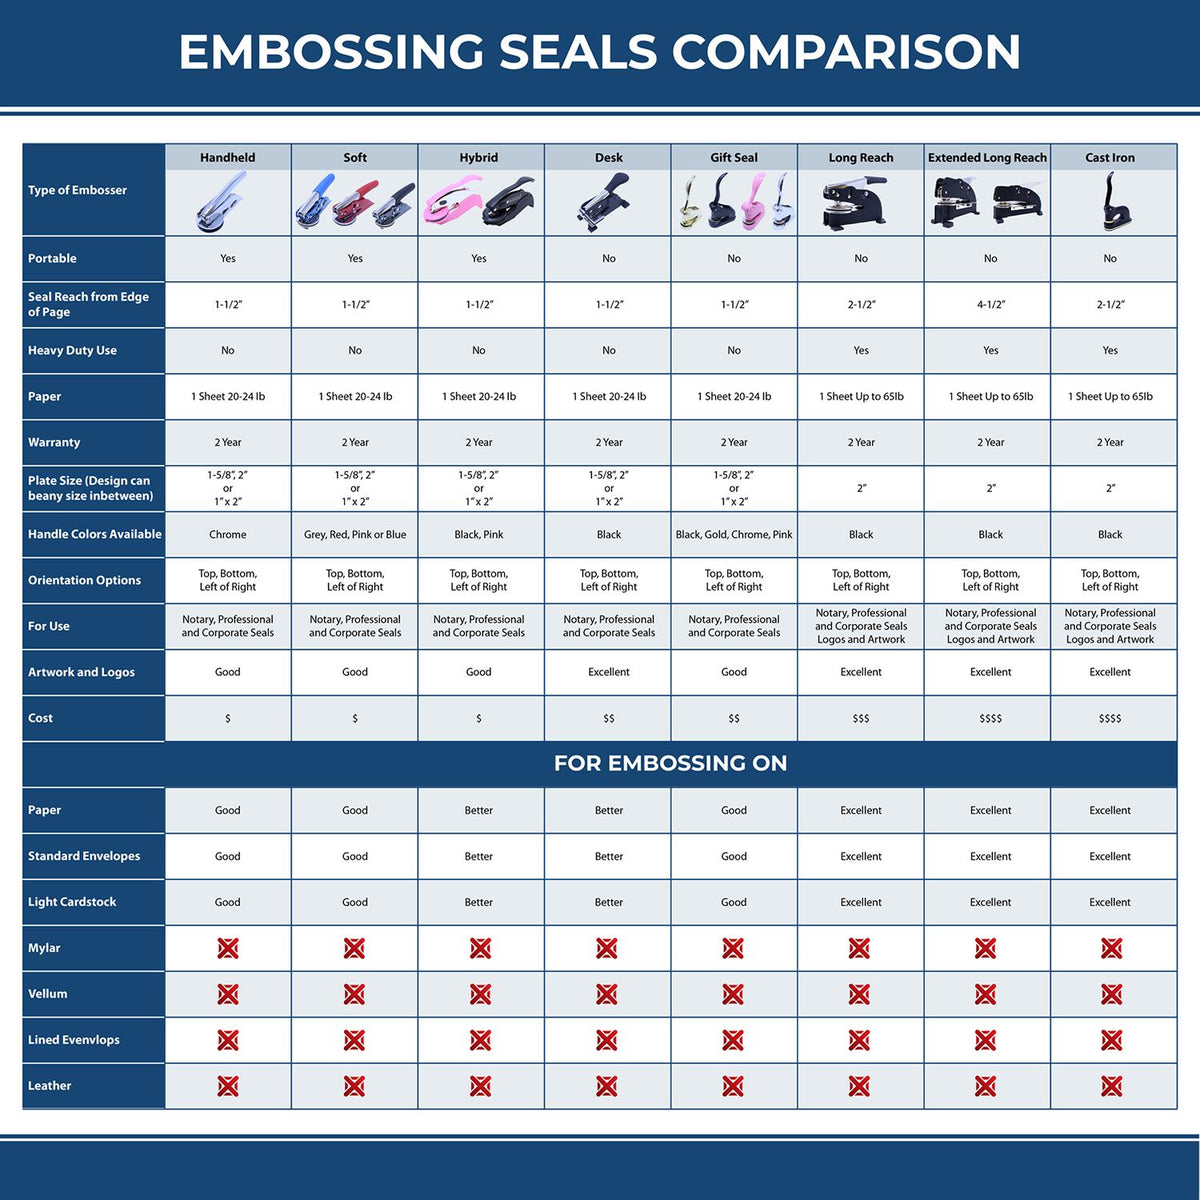 A comparison chart for the different types of mount models available for the State of Maine Extended Long Reach Geologist Seal